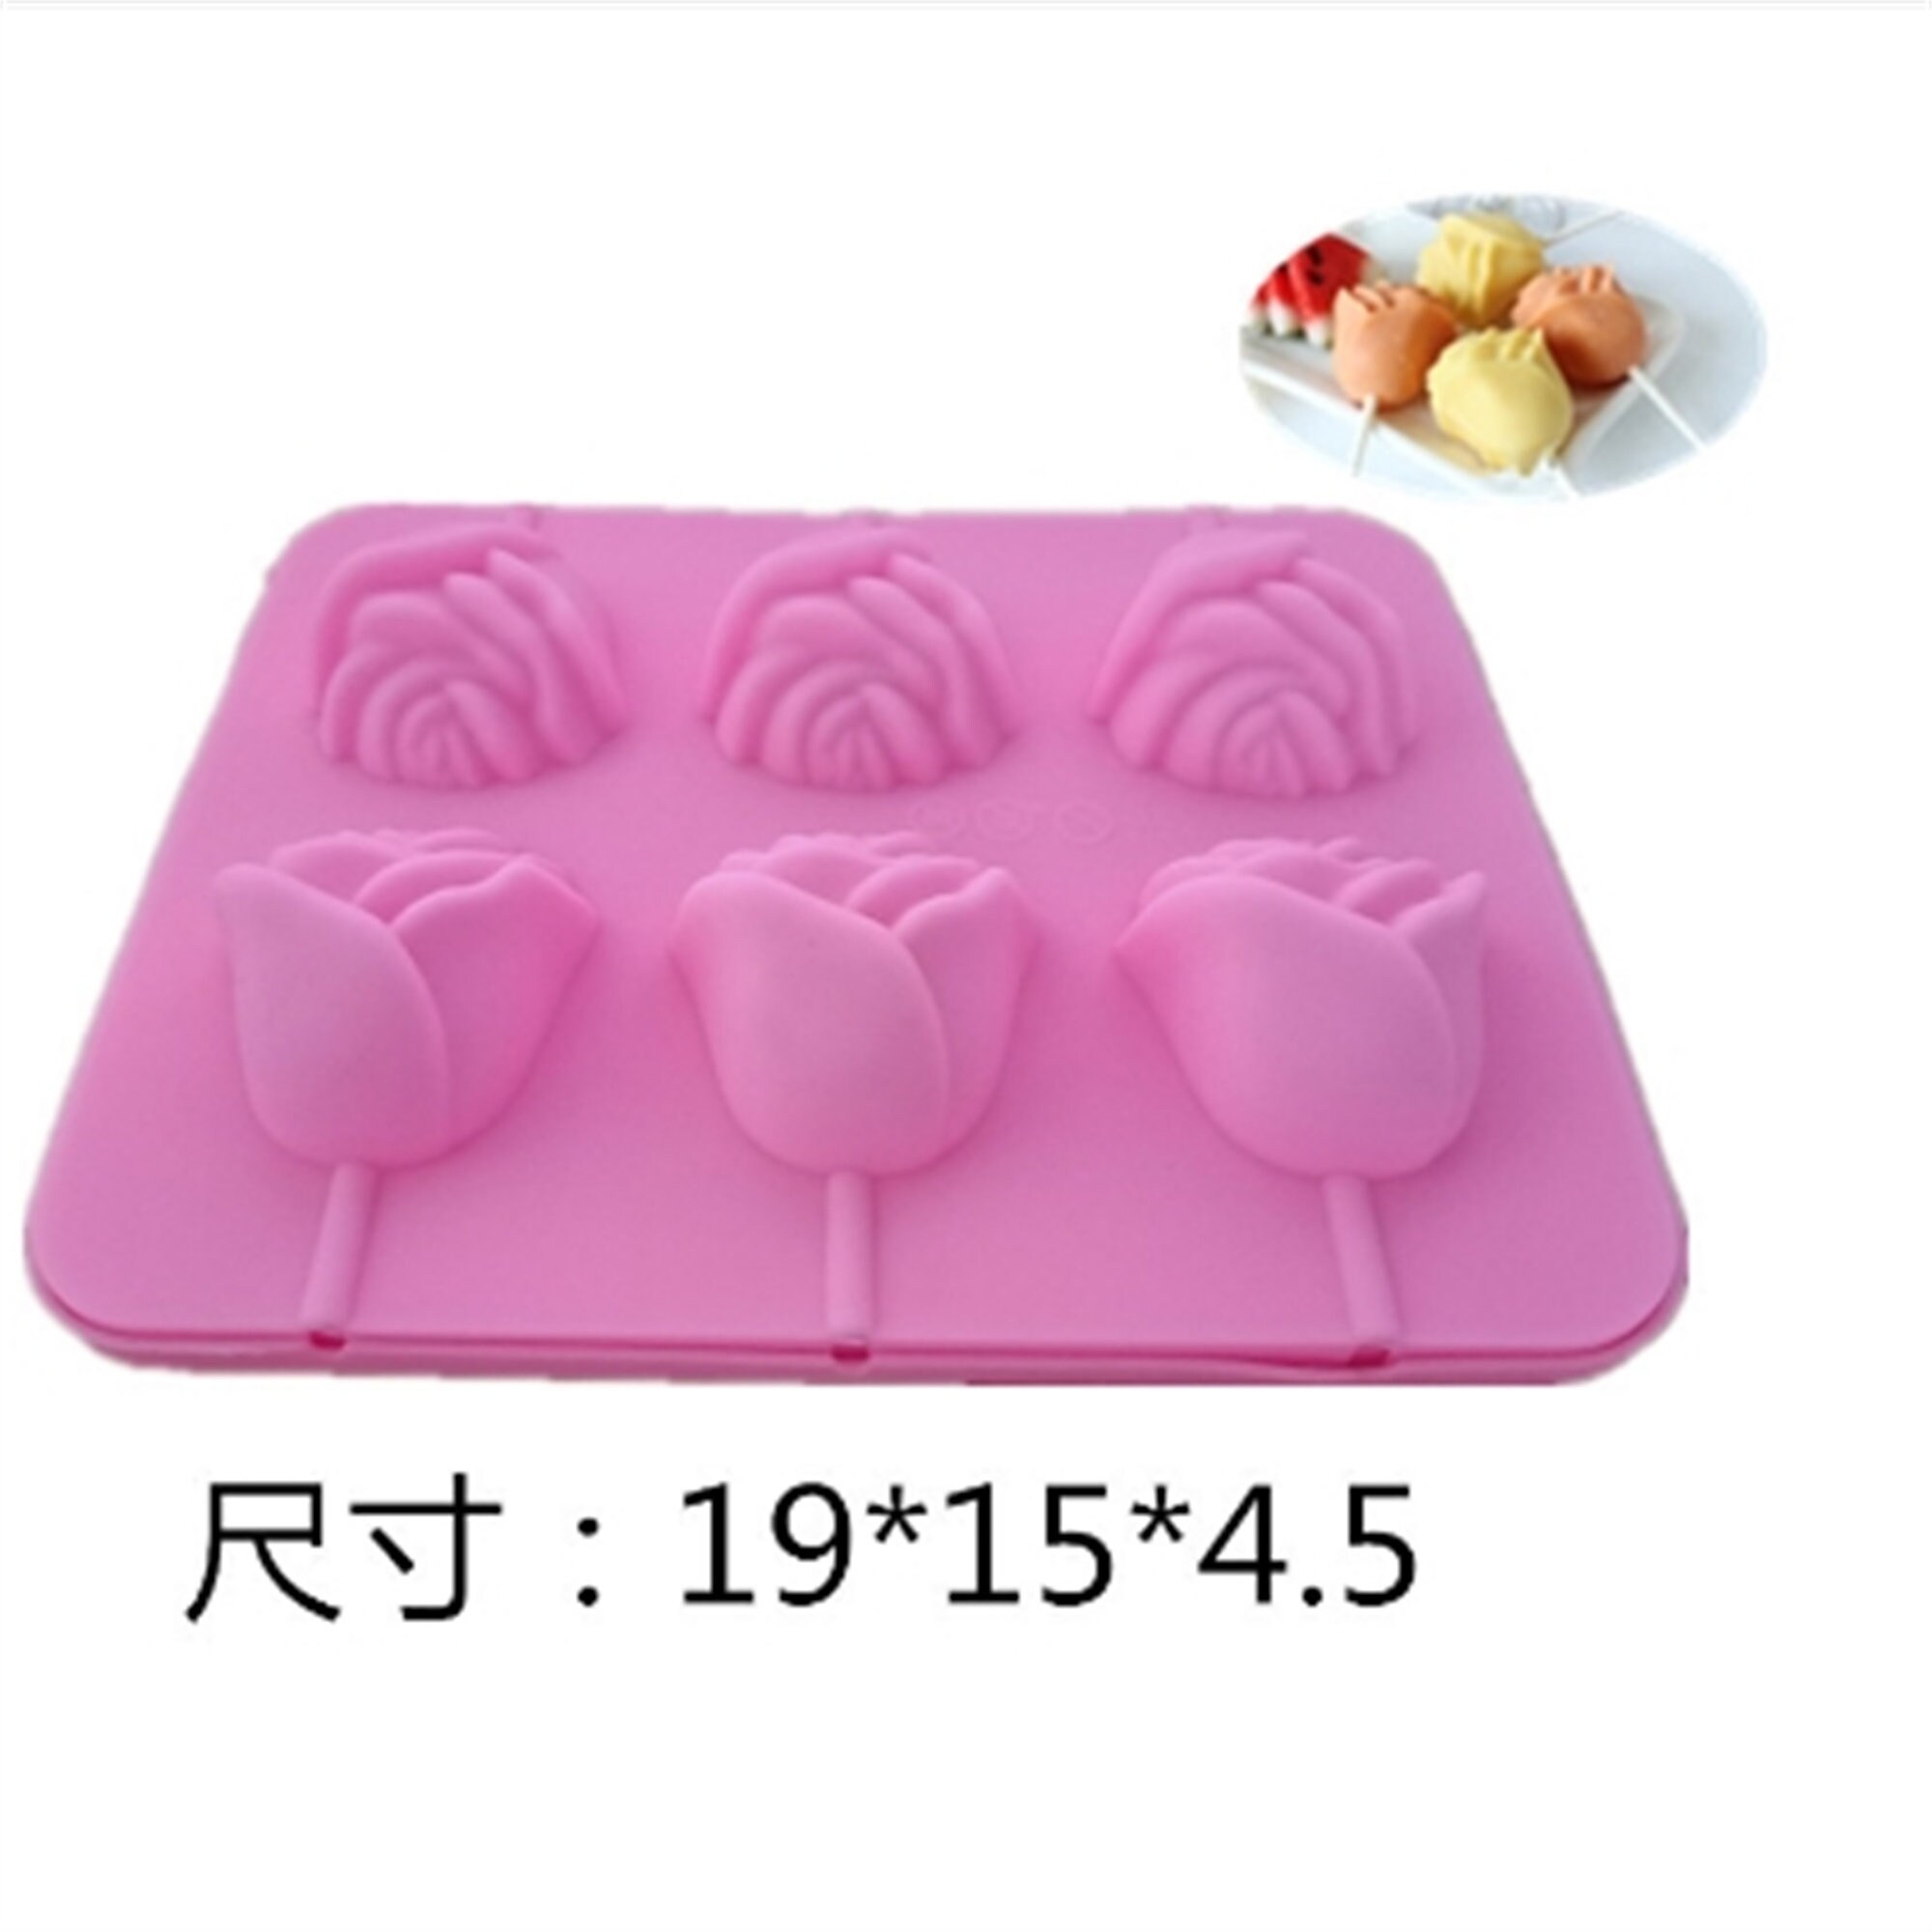 Rose Flower Ice Cube Mold Chocolate Cookie Cup Cake Baking Soap Mold -  China Rose Flower Silicone Tray and Cake Bread Pudding Chocolate Muffin  Soap price